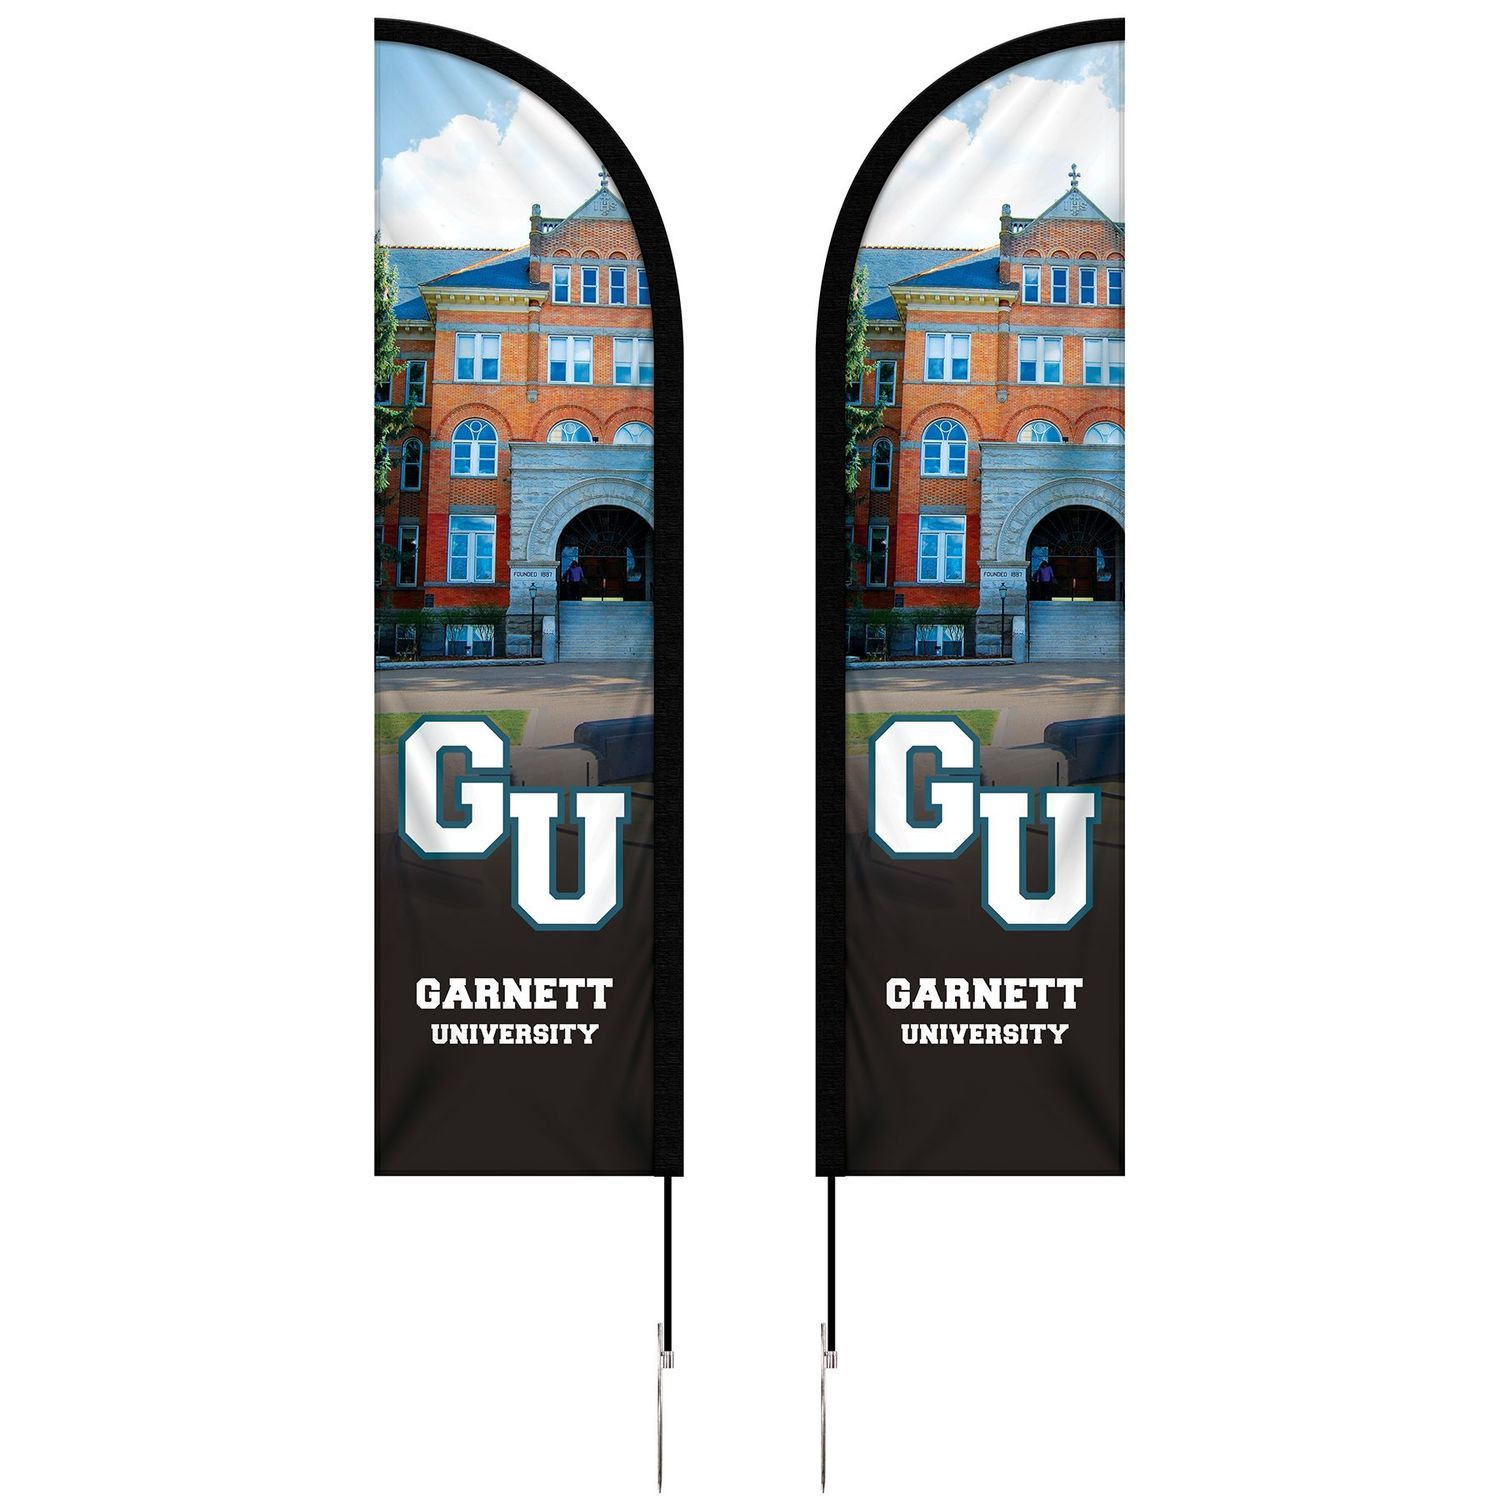 8 foot Double Sided Portable Half Drop Banner Flag With Hardware and Grommets